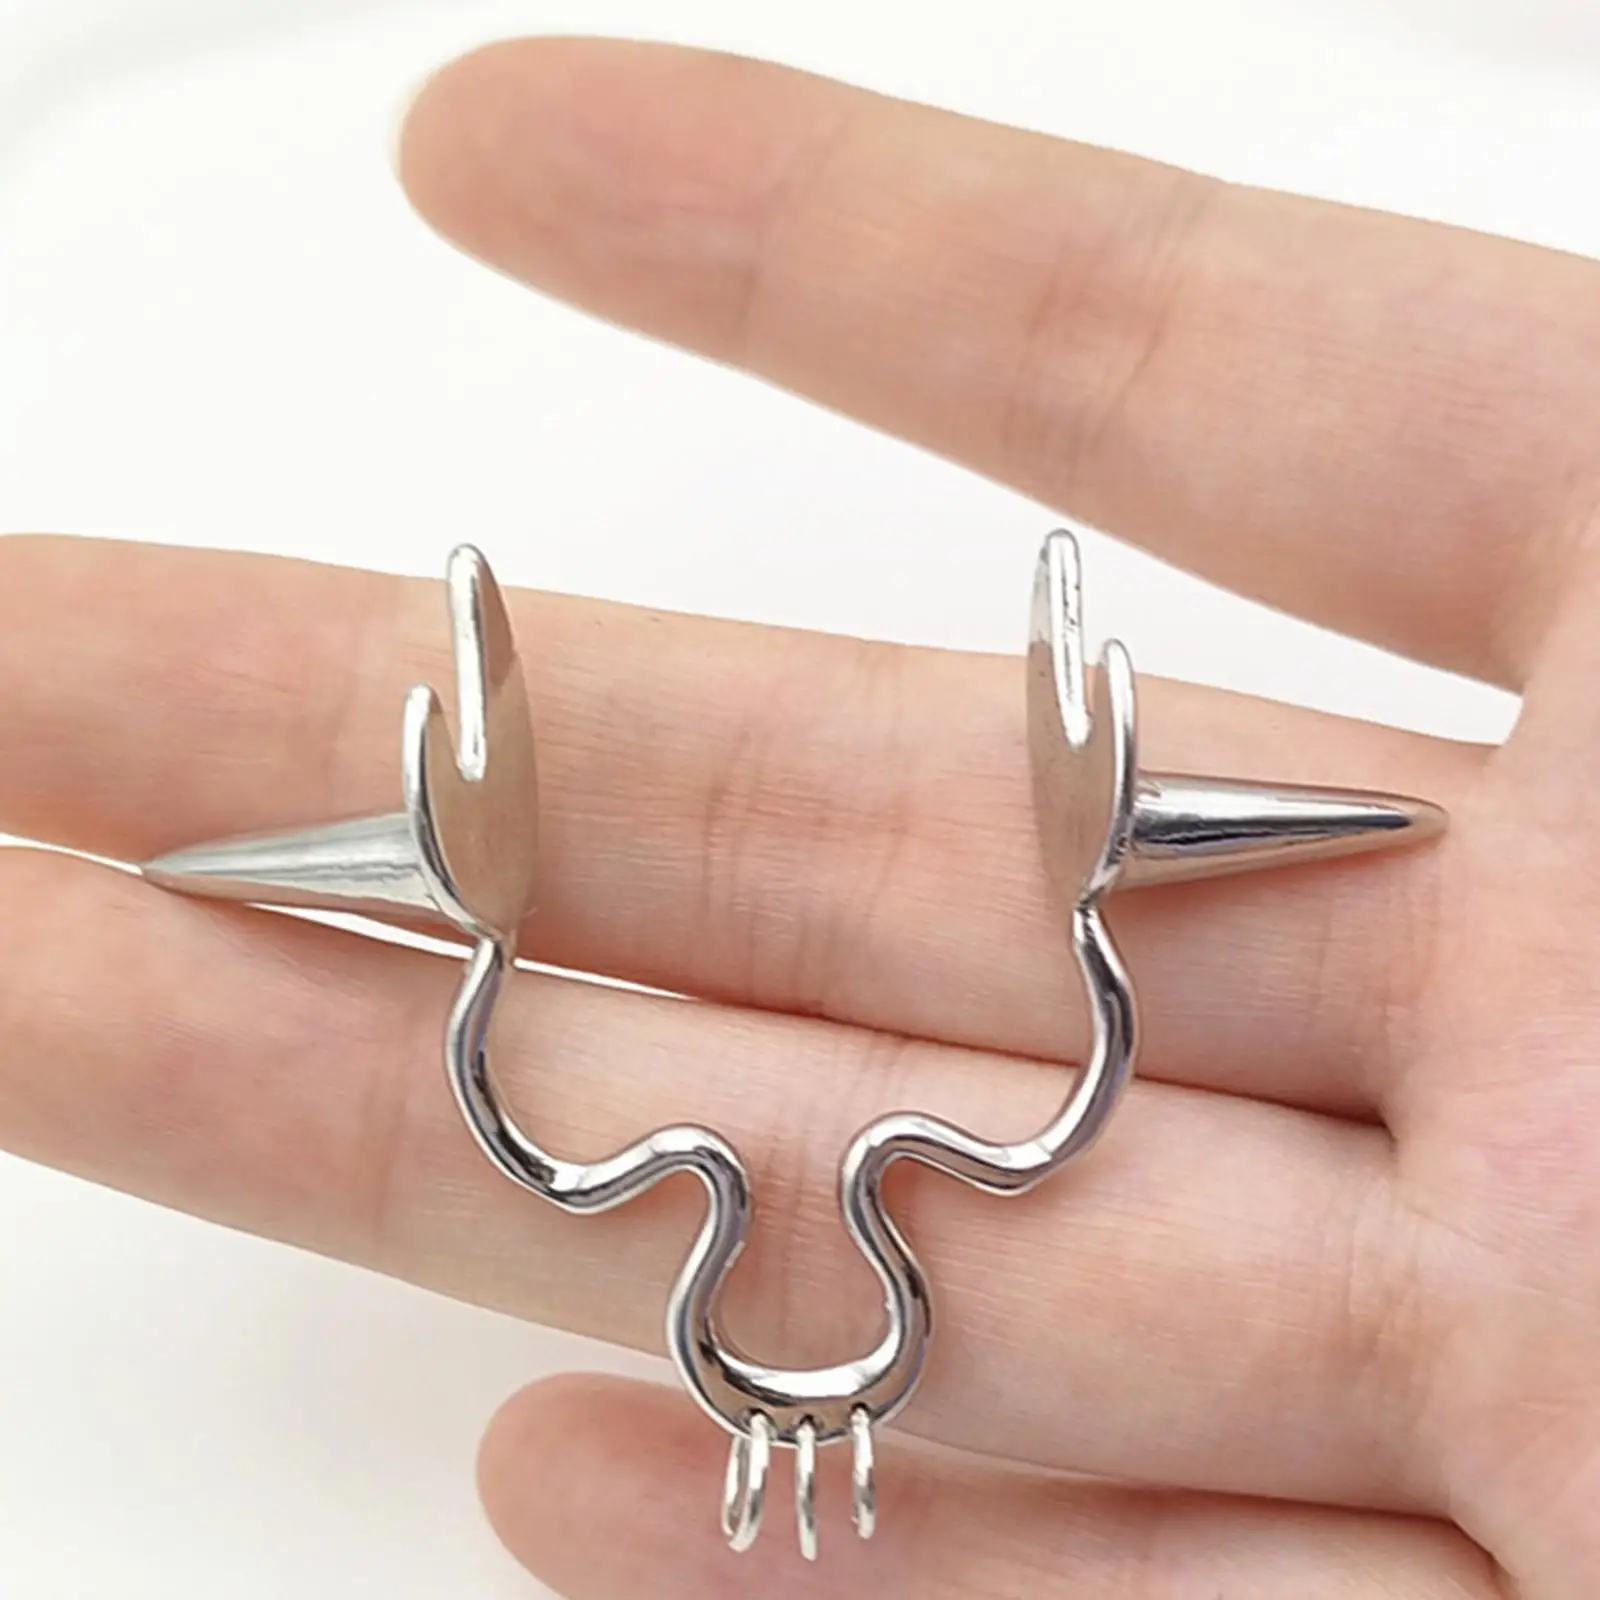 Nose Ring Body Jewelry Fashion Nose Cuffs Rings Cosplay Nose Piercings Jewelry Creative for Stage Gift Holiday Makeup Women Men